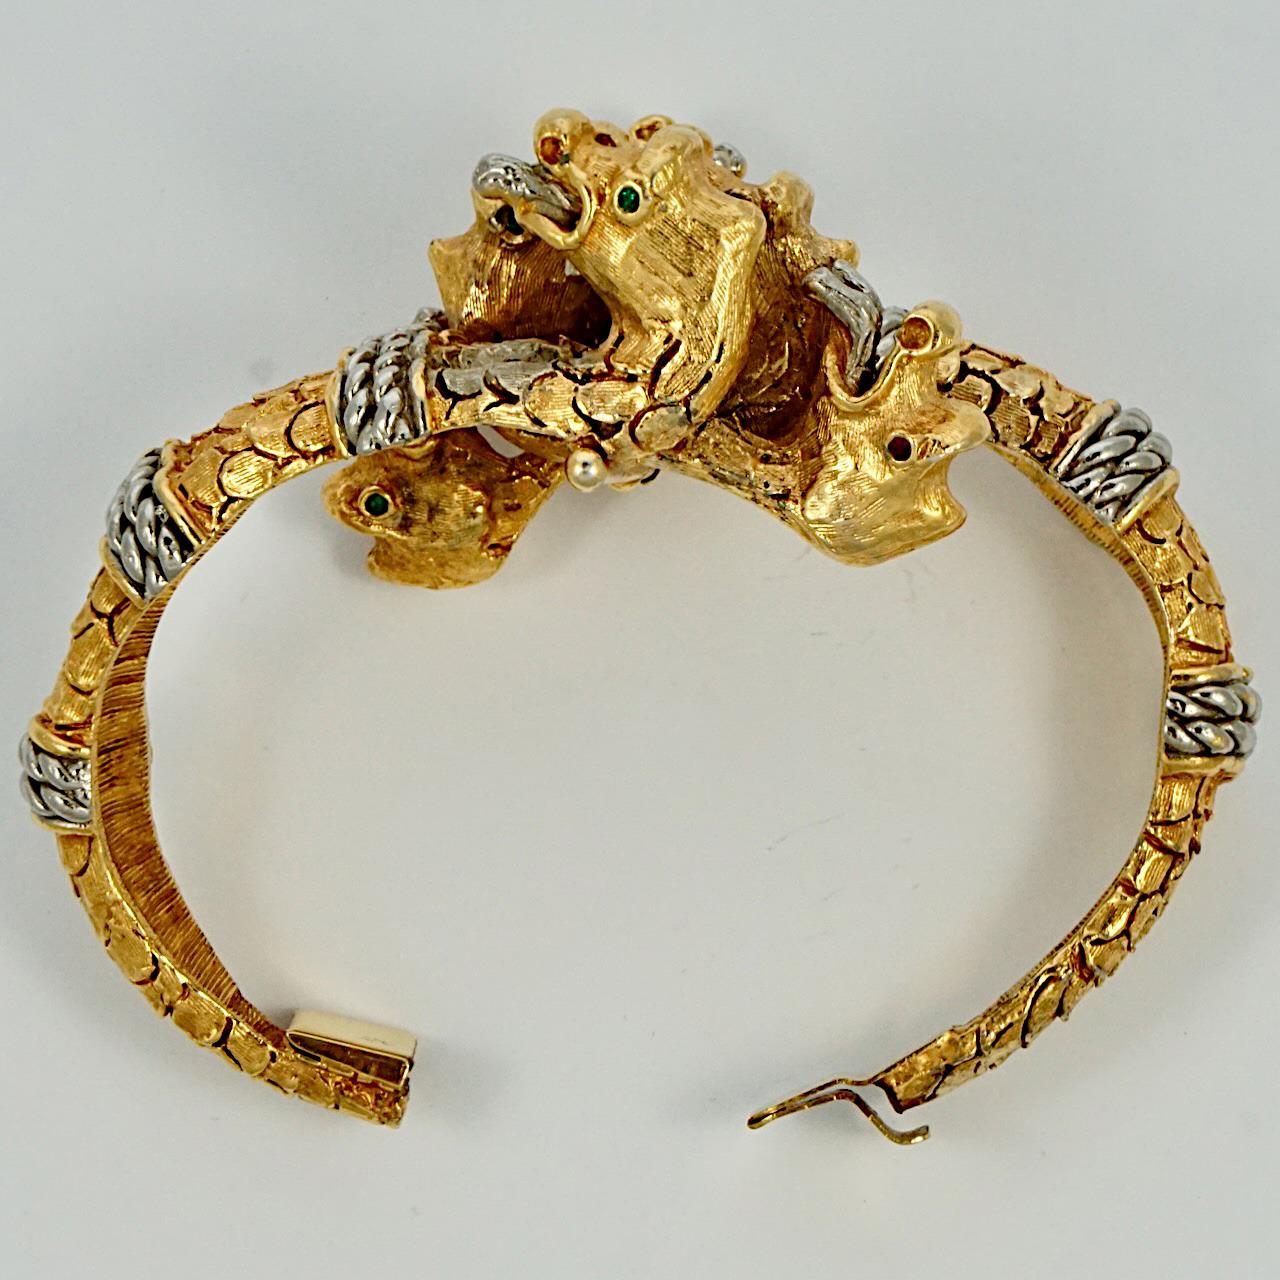 Women's or Men's Kenneth Jay Lane Gold Plated and Silver Plated Dragon Bracelet circa 1960s